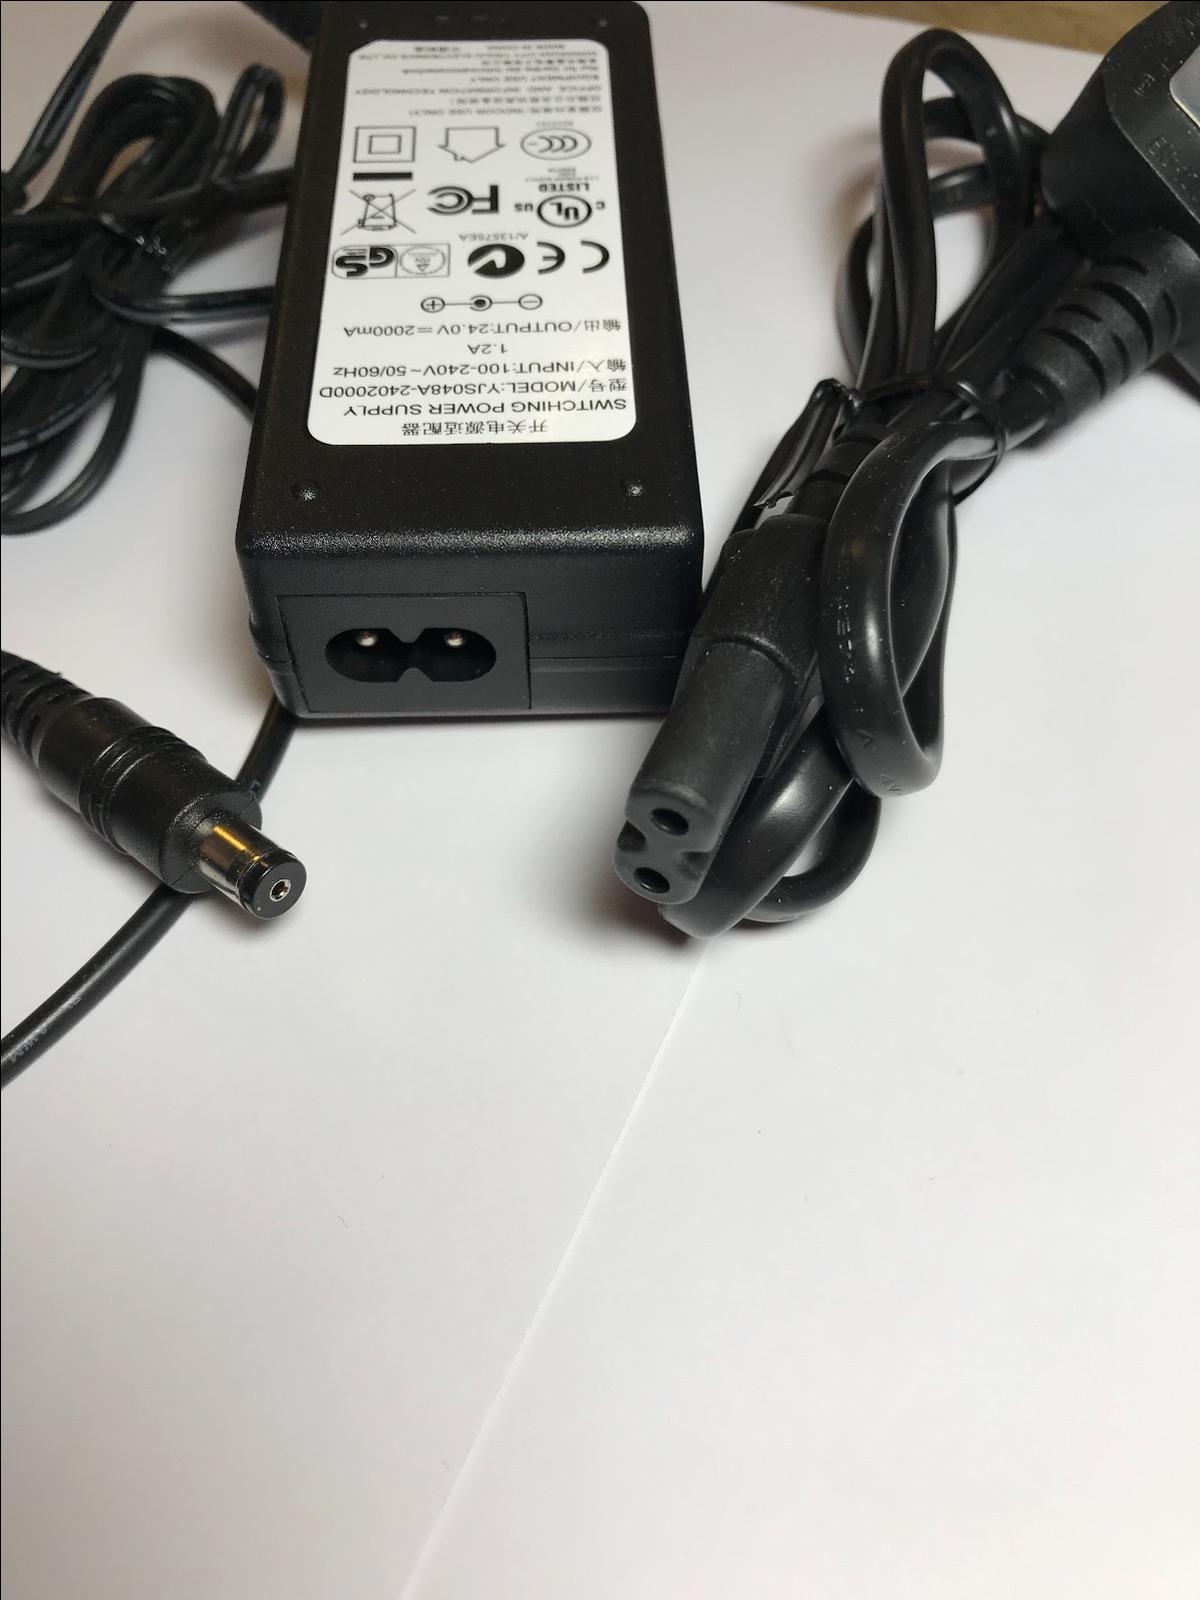 24V 2A AC-DC Adapter Power Supply for 25V LG NB4540 Sound Bar Audio System special adapter tip 6.5mm*1.5mm This Item